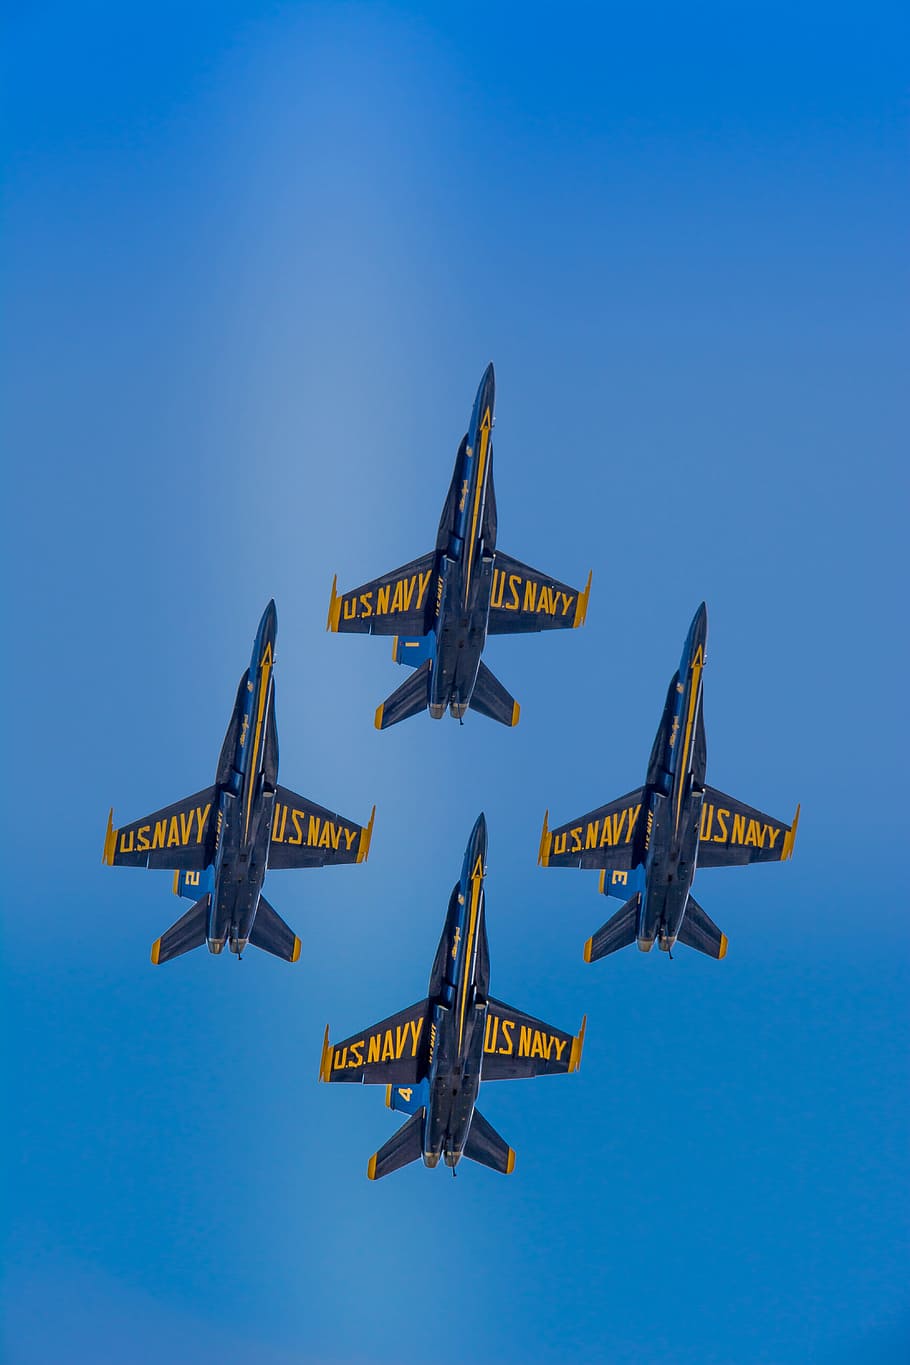 Blue Angels, F-18, Hornet, Fly, Navy, jet, airplane, formation